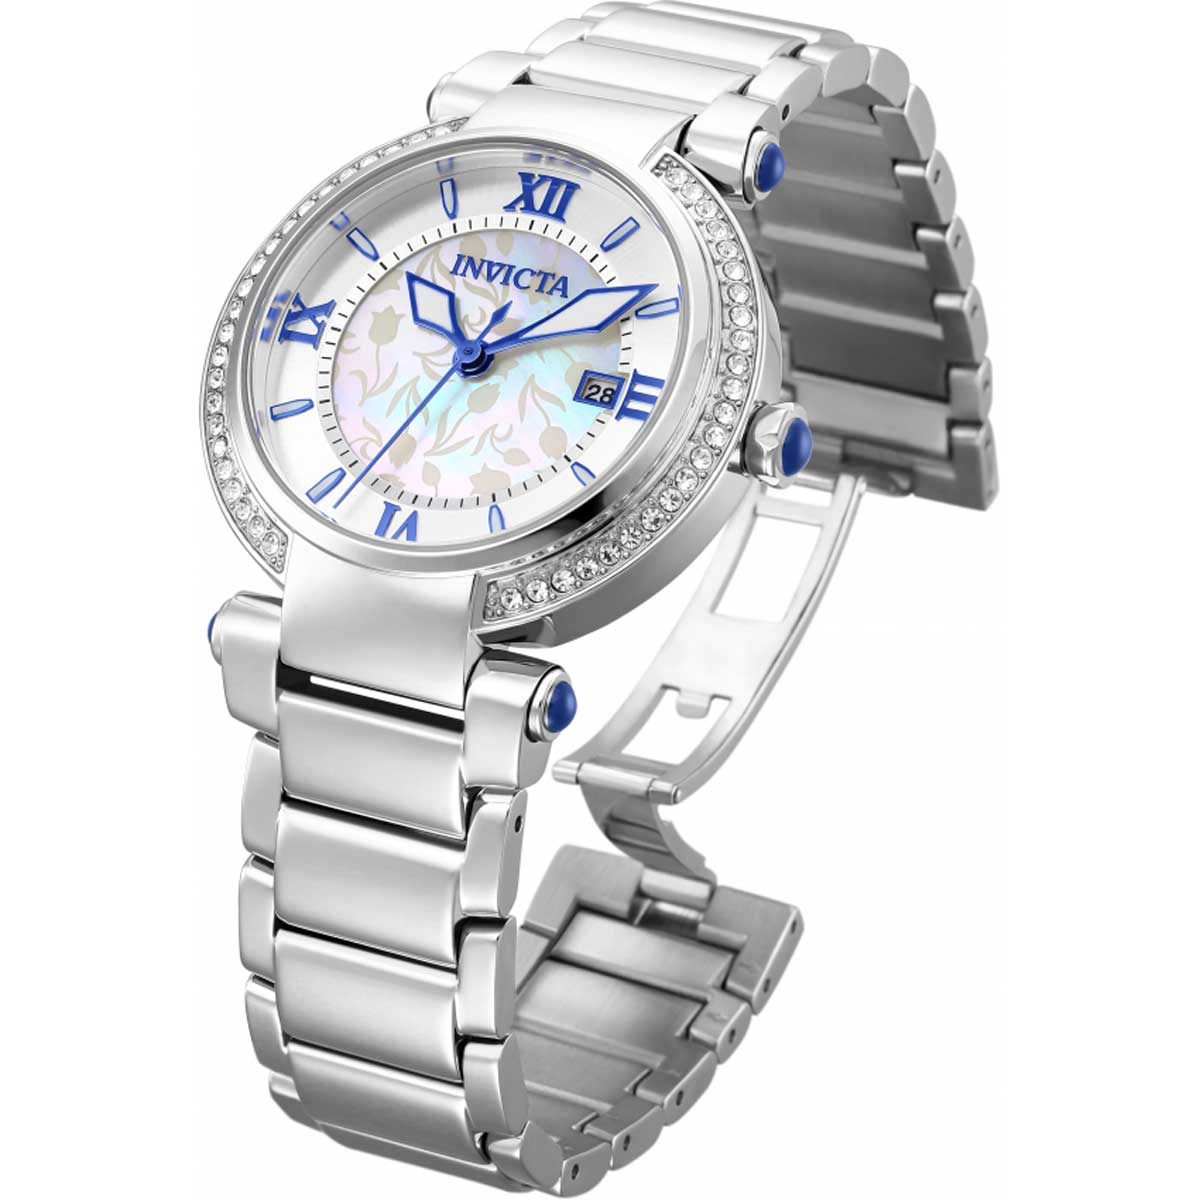 Invicta Women's 27082 Angel Quartz Stainless Steel Strap 3 Hand White, Silver Dial Watch - image 2 of 3